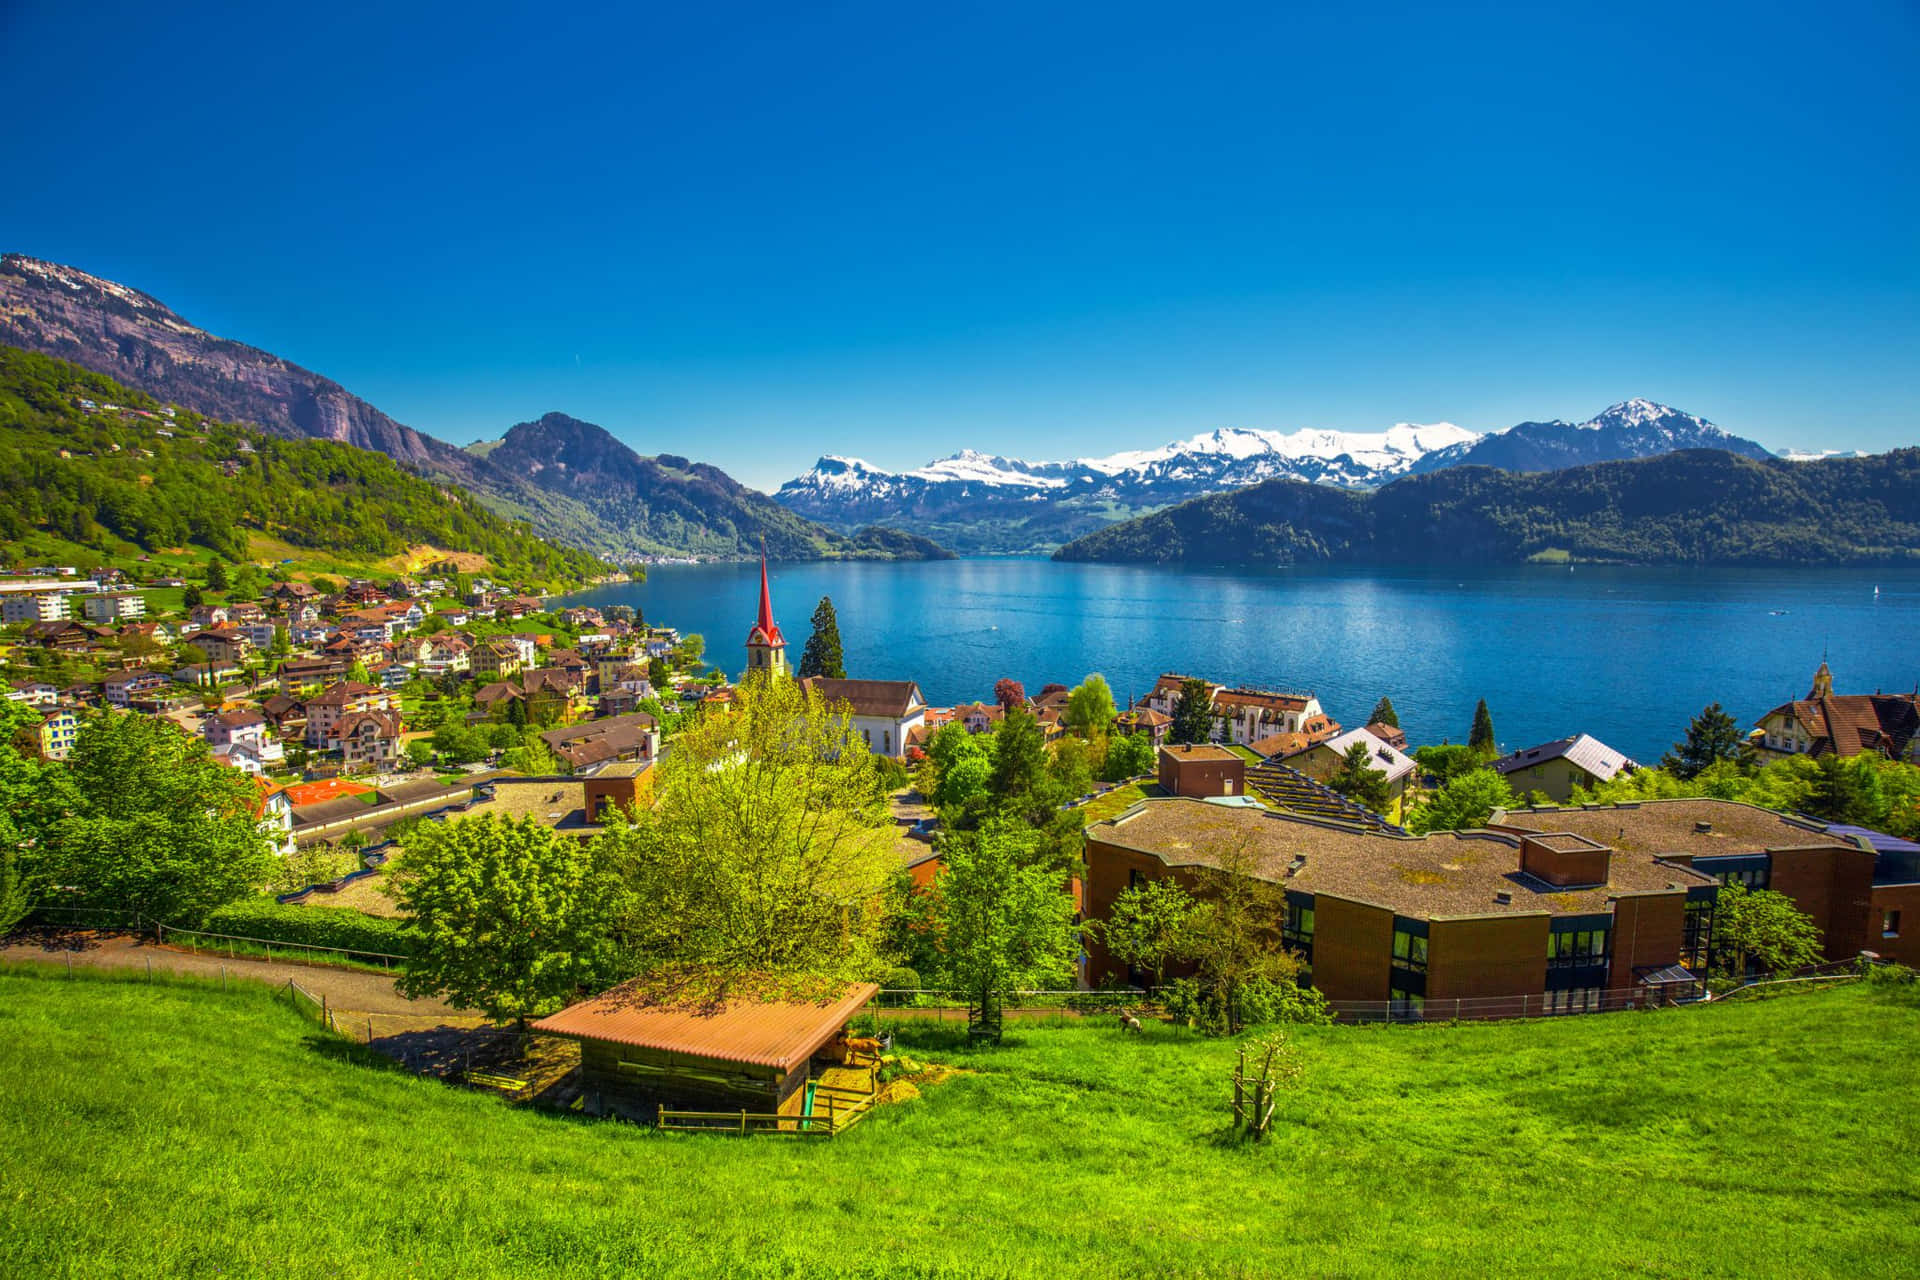 An idyllic view of the Swiss town of Lucerne in summer